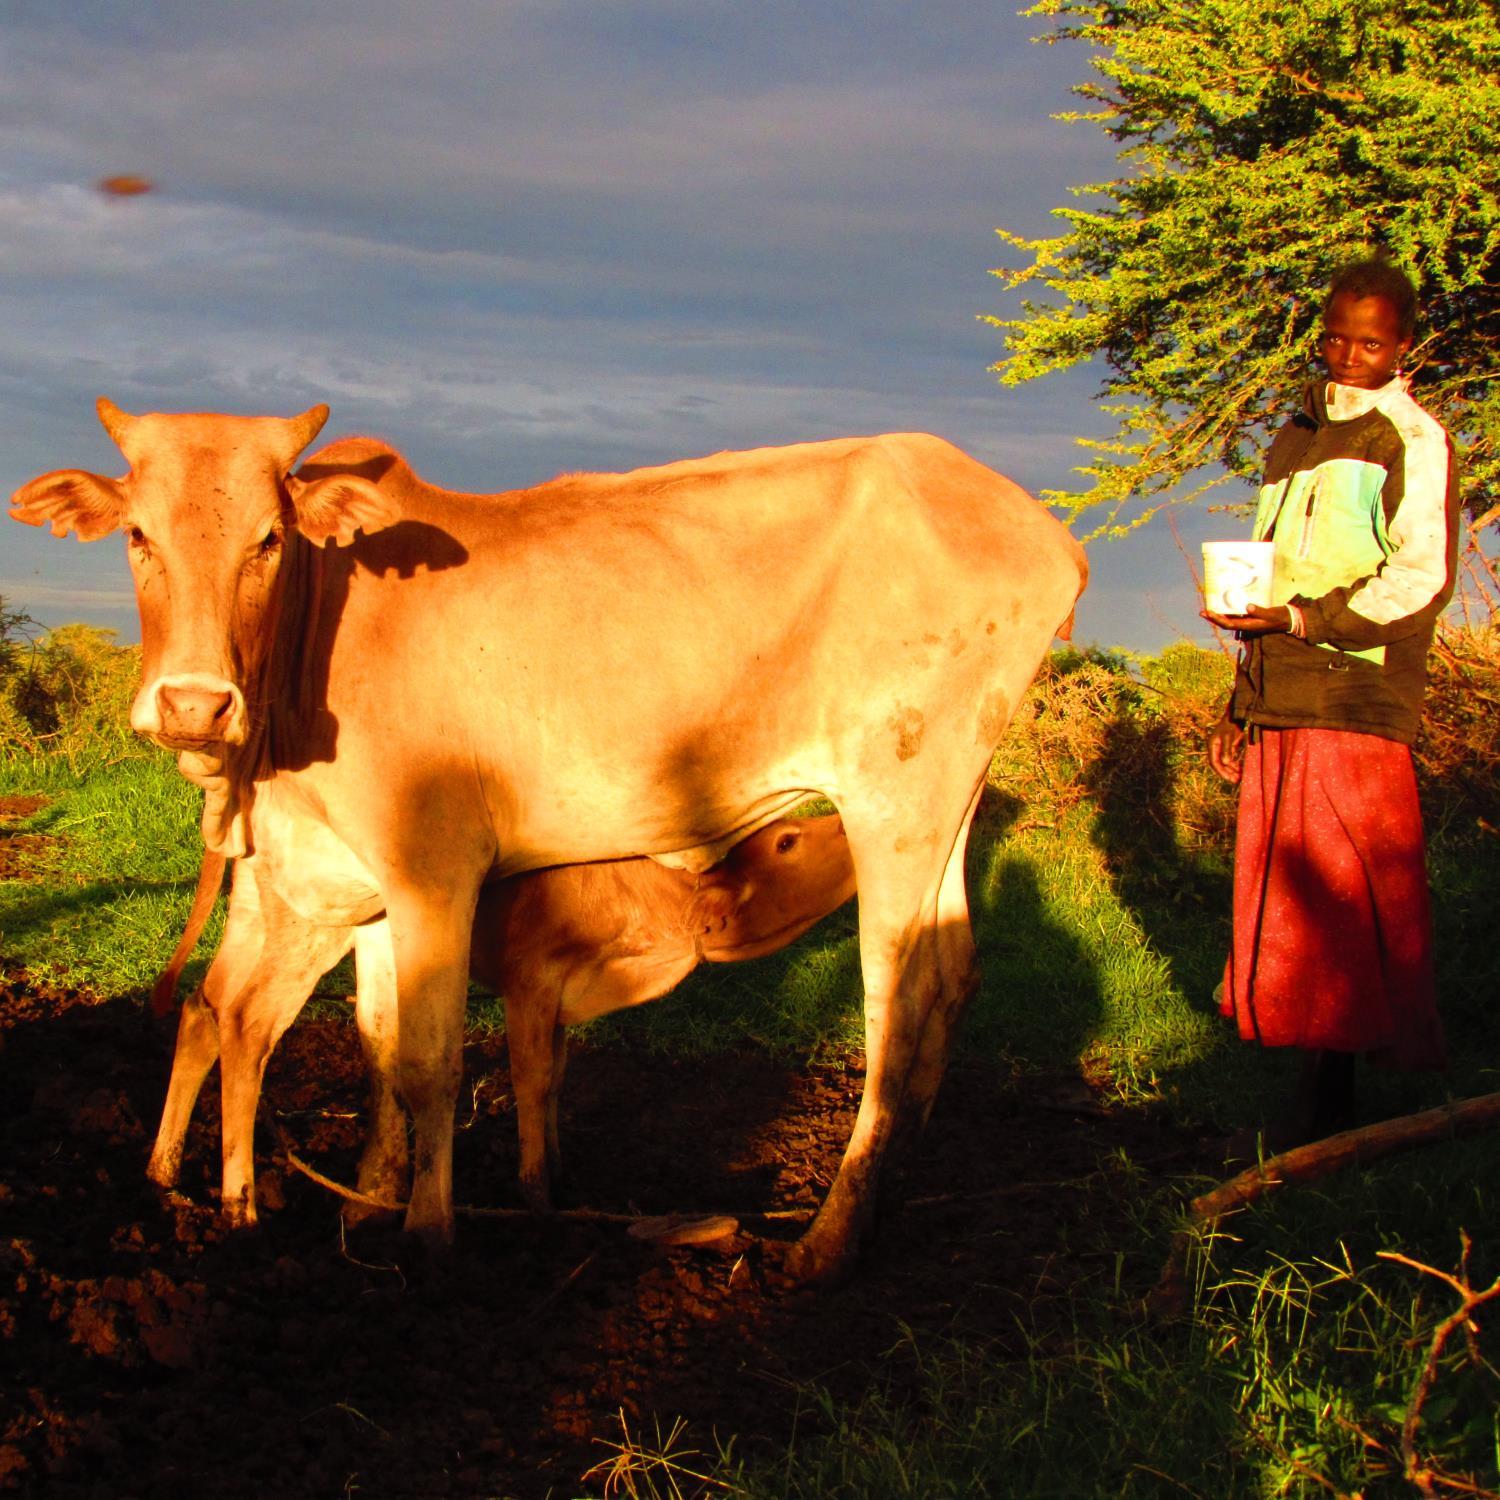 Livestock, Livelihoods and Health is researching animal-to-human disease transmission in Tanzania. Newsletter: https://t.co/RezAQh2ez1 Funded by ZELS.